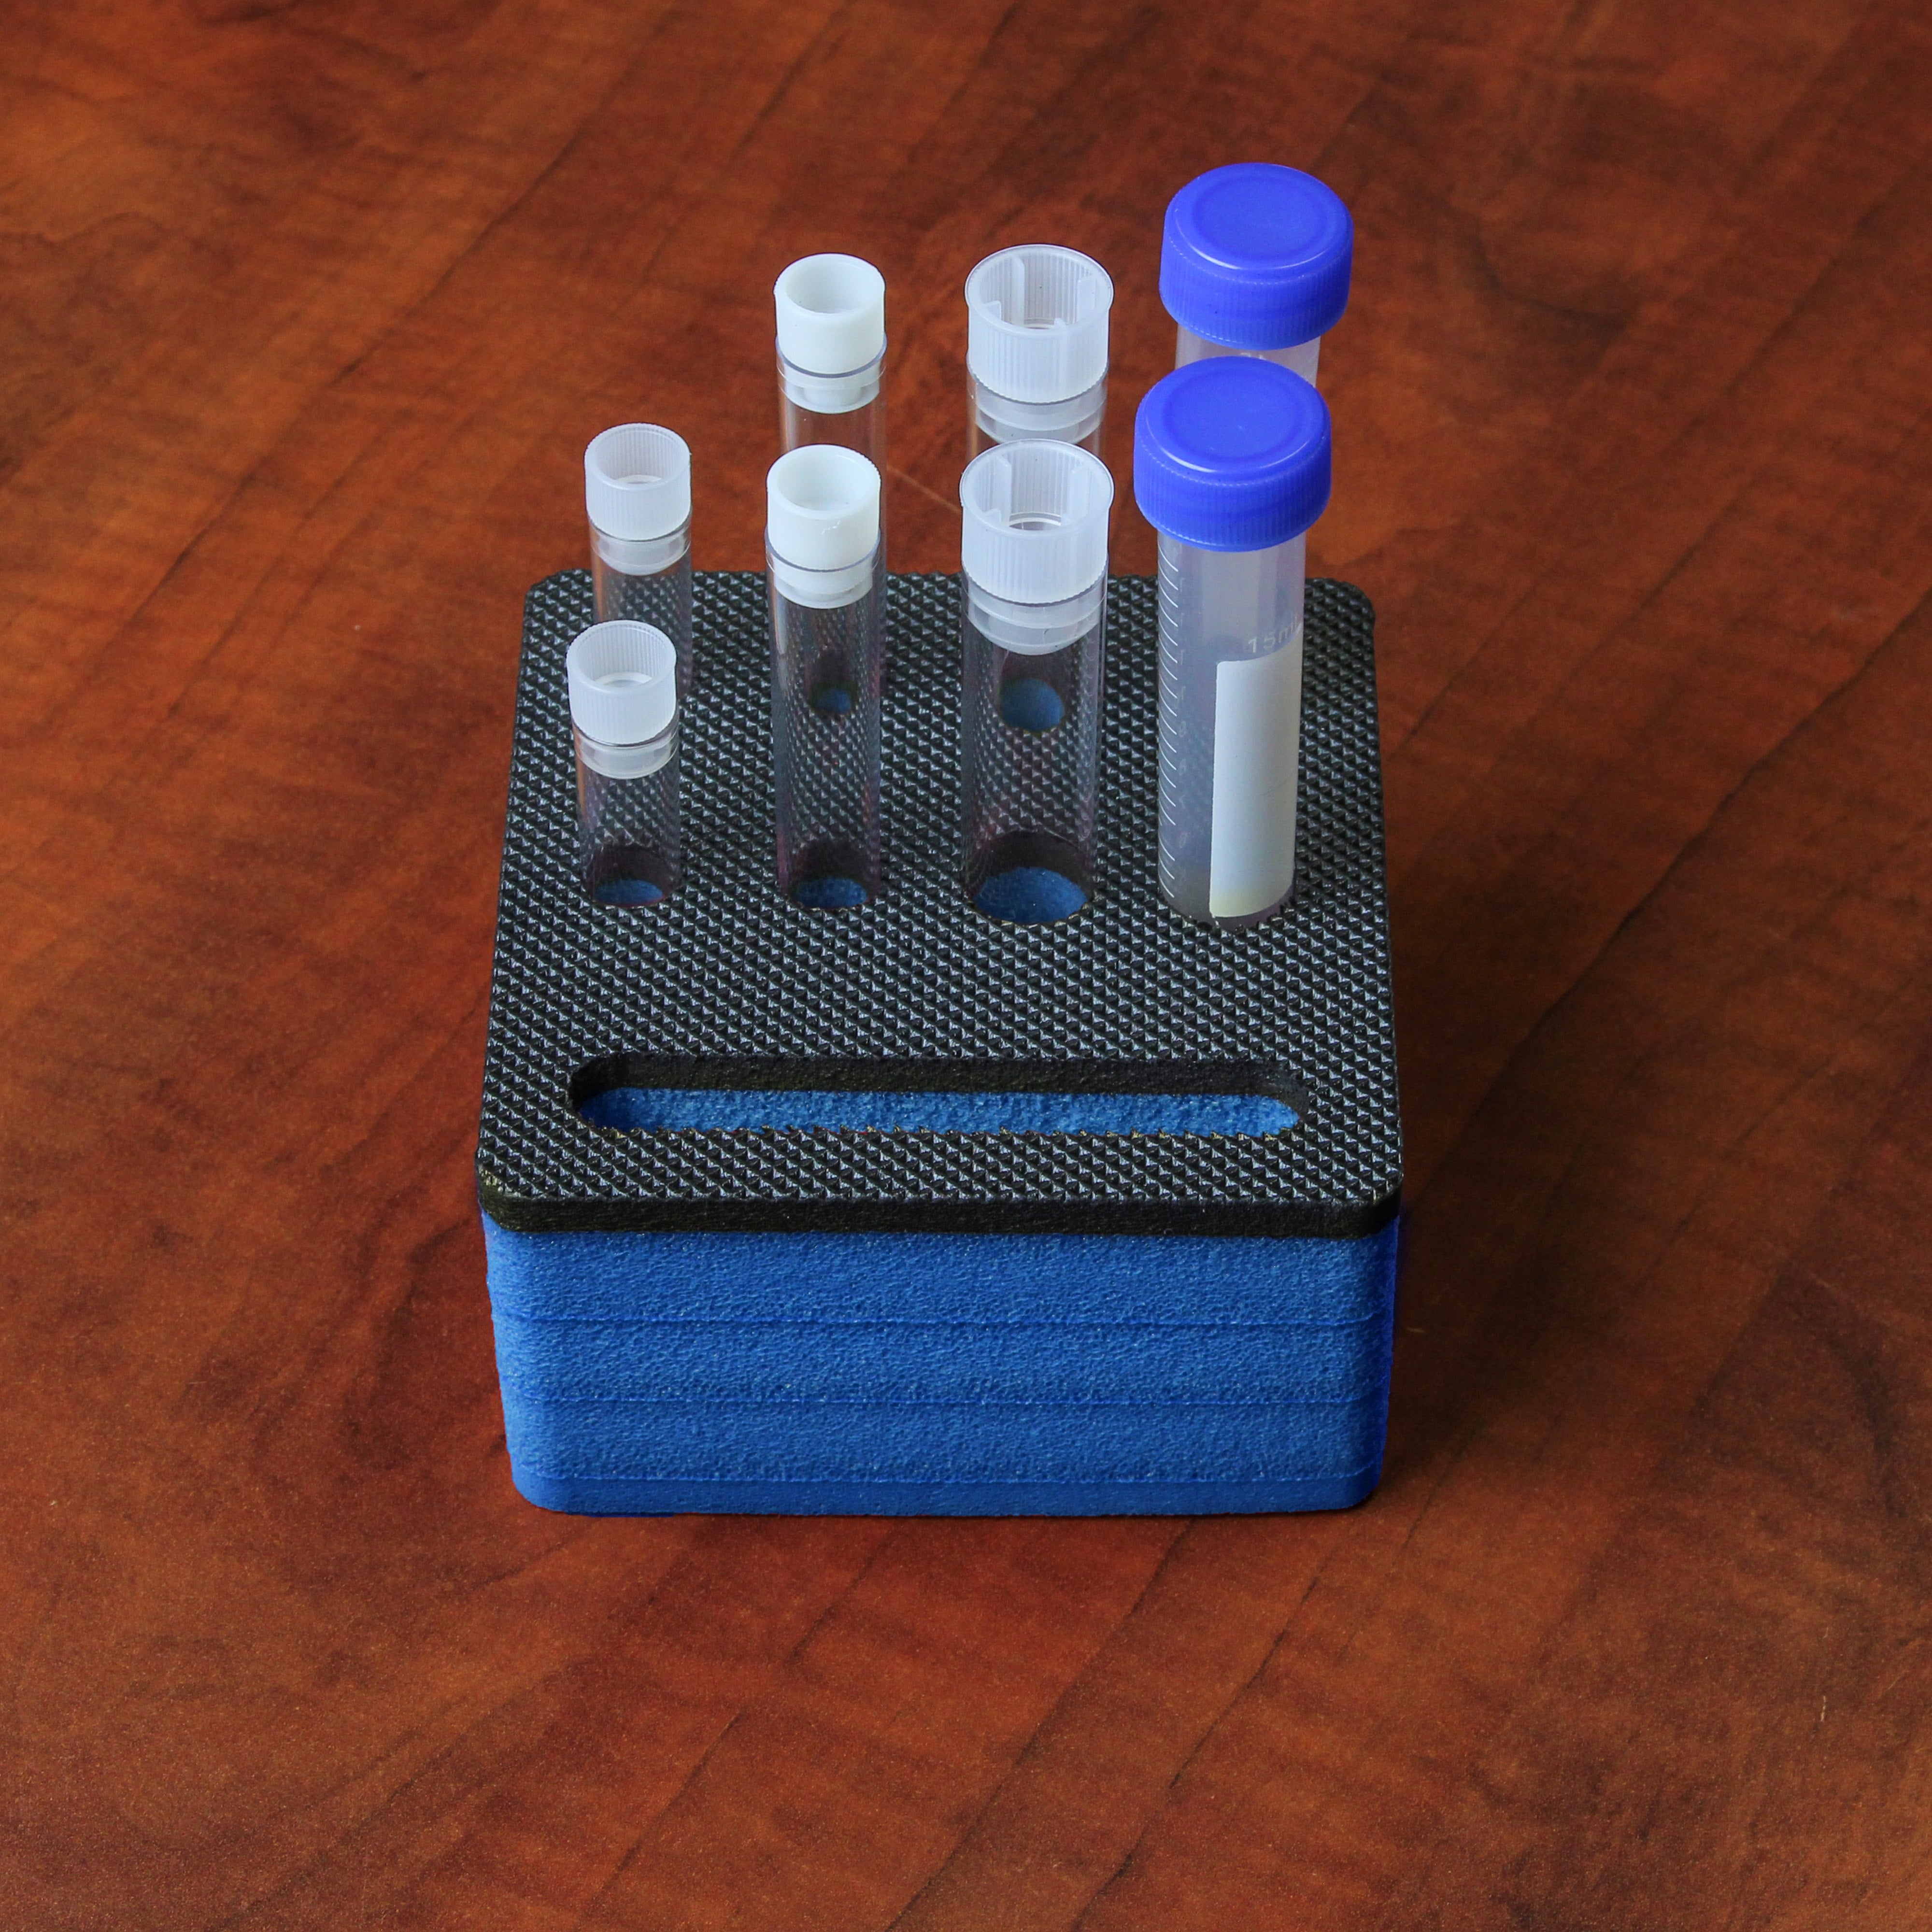 Personal Travel Test Tube Holder Rack Foam Lab Storage Organizer Compact St Transport Holds 8 Tubes Fits up to 11mm 13mm 15mm 17mm Diameter